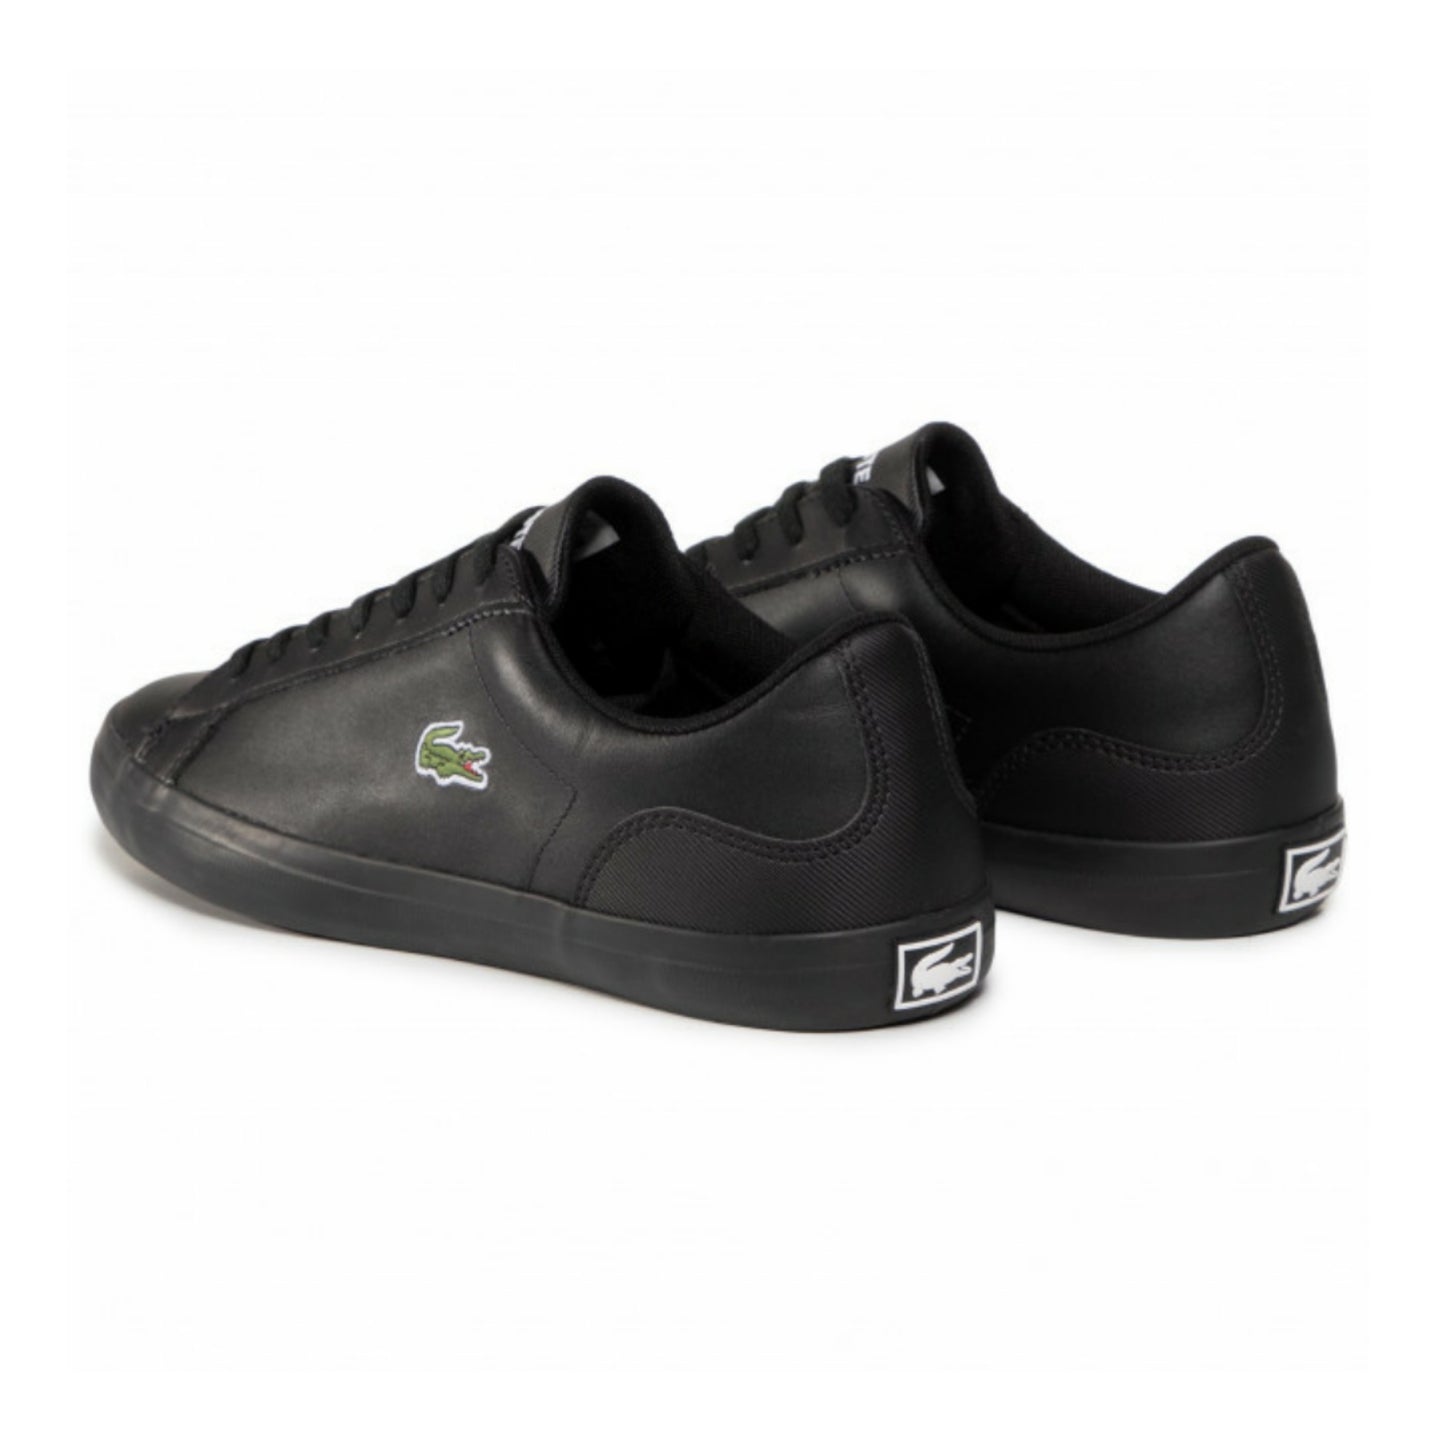 Lerond 0120 Black Green by Lacoste